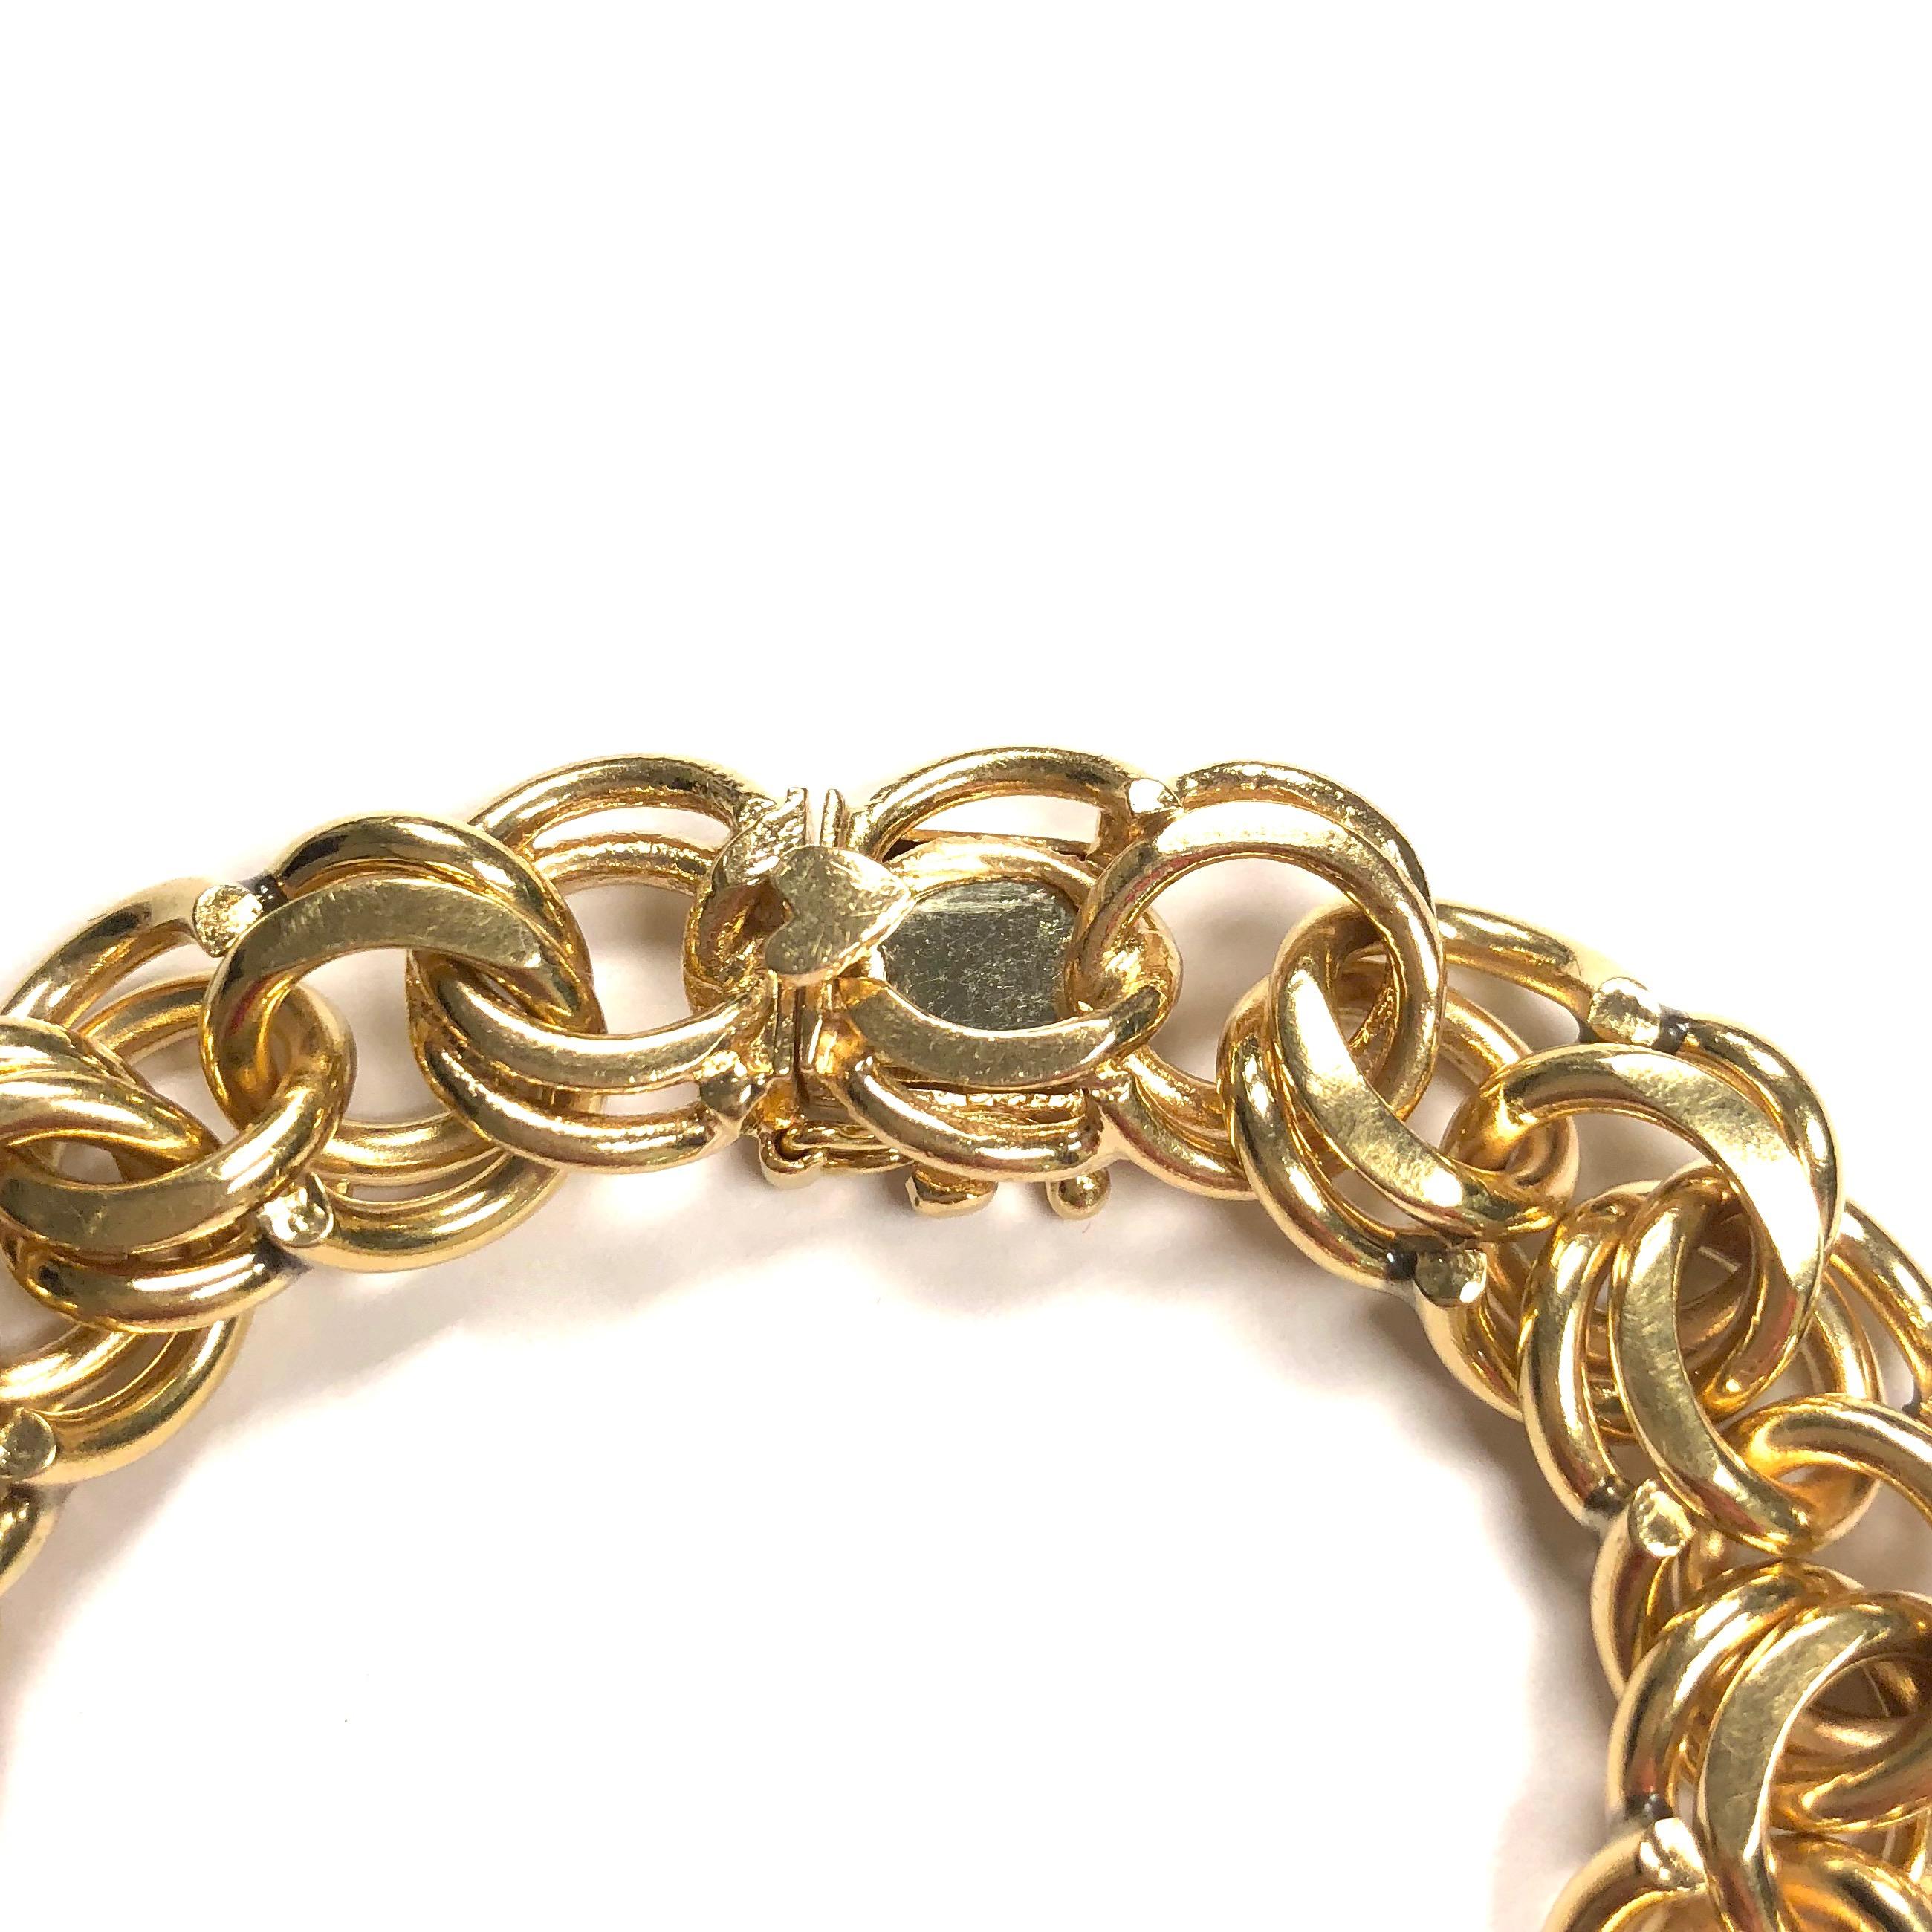 Crafted in 14K yellow gold, the bracelet is composed a series of interlocking solid gold links. Ready for any size charm collection, small or big, heavy or light. 
Measurements: 
Length: 7.25 inches
Width: 0.56 inches
Weight: 63.2 grams
